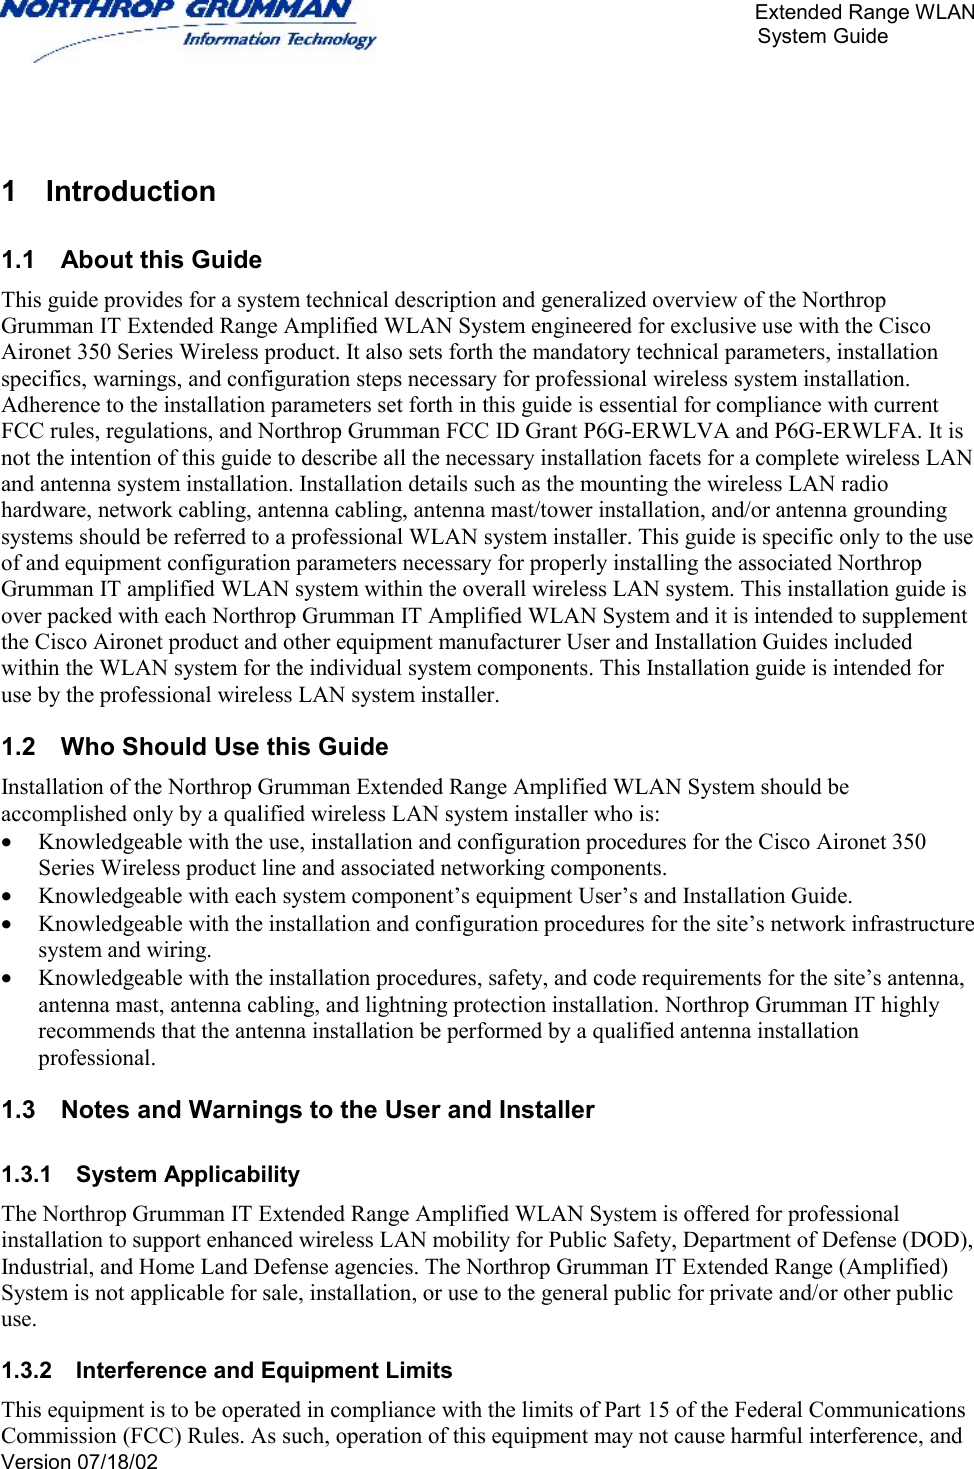       Extended Range WLAN                                                     System Guide     Version 07/18/02    1 Introduction 1.1  About this Guide This guide provides for a system technical description and generalized overview of the Northrop Grumman IT Extended Range Amplified WLAN System engineered for exclusive use with the Cisco Aironet 350 Series Wireless product. It also sets forth the mandatory technical parameters, installation specifics, warnings, and configuration steps necessary for professional wireless system installation. Adherence to the installation parameters set forth in this guide is essential for compliance with current FCC rules, regulations, and Northrop Grumman FCC ID Grant P6G-ERWLVA and P6G-ERWLFA. It is not the intention of this guide to describe all the necessary installation facets for a complete wireless LAN and antenna system installation. Installation details such as the mounting the wireless LAN radio hardware, network cabling, antenna cabling, antenna mast/tower installation, and/or antenna grounding systems should be referred to a professional WLAN system installer. This guide is specific only to the use of and equipment configuration parameters necessary for properly installing the associated Northrop Grumman IT amplified WLAN system within the overall wireless LAN system. This installation guide is over packed with each Northrop Grumman IT Amplified WLAN System and it is intended to supplement the Cisco Aironet product and other equipment manufacturer User and Installation Guides included within the WLAN system for the individual system components. This Installation guide is intended for use by the professional wireless LAN system installer.  1.2  Who Should Use this Guide Installation of the Northrop Grumman Extended Range Amplified WLAN System should be accomplished only by a qualified wireless LAN system installer who is: •  Knowledgeable with the use, installation and configuration procedures for the Cisco Aironet 350 Series Wireless product line and associated networking components. •  Knowledgeable with each system component’s equipment User’s and Installation Guide.  •  Knowledgeable with the installation and configuration procedures for the site’s network infrastructure system and wiring. •  Knowledgeable with the installation procedures, safety, and code requirements for the site’s antenna, antenna mast, antenna cabling, and lightning protection installation. Northrop Grumman IT highly recommends that the antenna installation be performed by a qualified antenna installation professional. 1.3  Notes and Warnings to the User and Installer 1.3.1 System Applicability The Northrop Grumman IT Extended Range Amplified WLAN System is offered for professional installation to support enhanced wireless LAN mobility for Public Safety, Department of Defense (DOD), Industrial, and Home Land Defense agencies. The Northrop Grumman IT Extended Range (Amplified) System is not applicable for sale, installation, or use to the general public for private and/or other public use. 1.3.2  Interference and Equipment Limits This equipment is to be operated in compliance with the limits of Part 15 of the Federal Communications Commission (FCC) Rules. As such, operation of this equipment may not cause harmful interference, and 